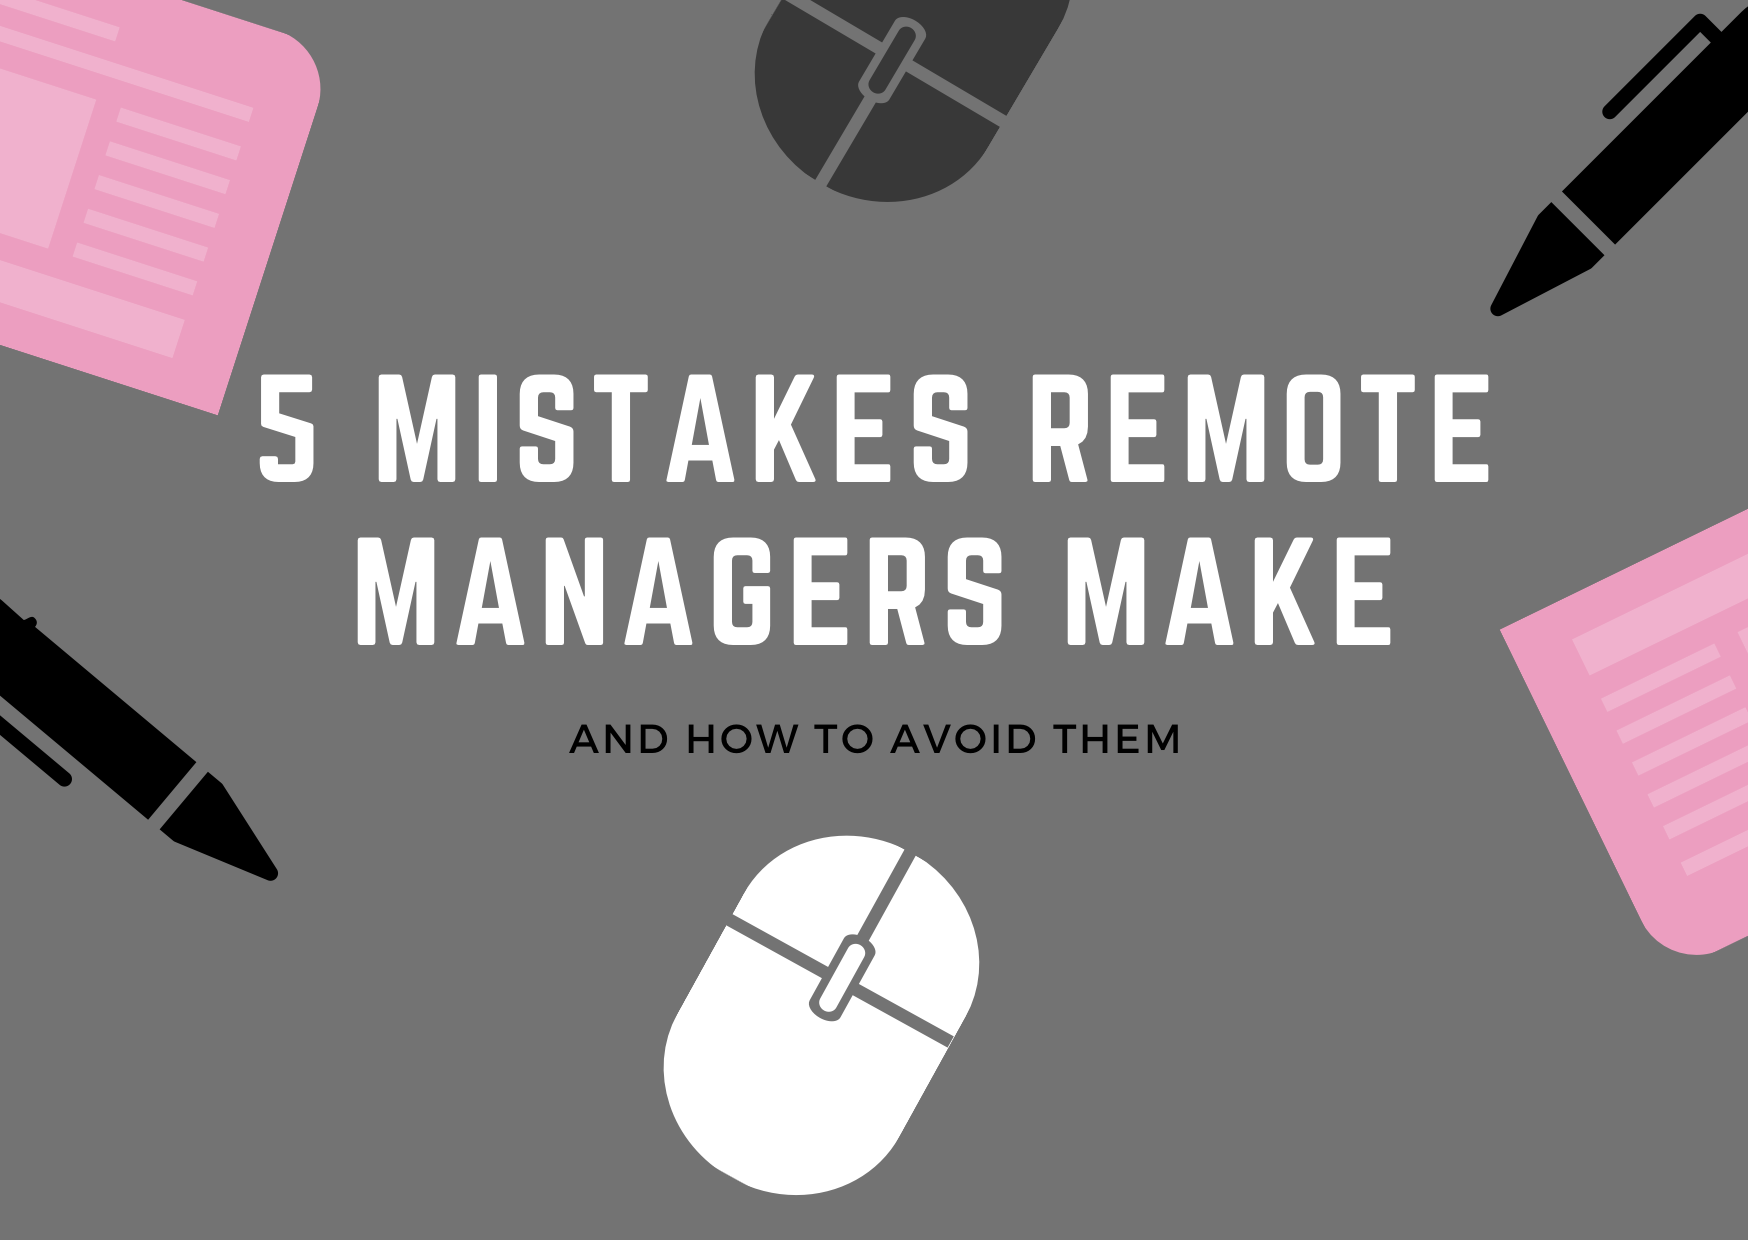 5 Mistakes Remote Managers Make And How To Avoid Them